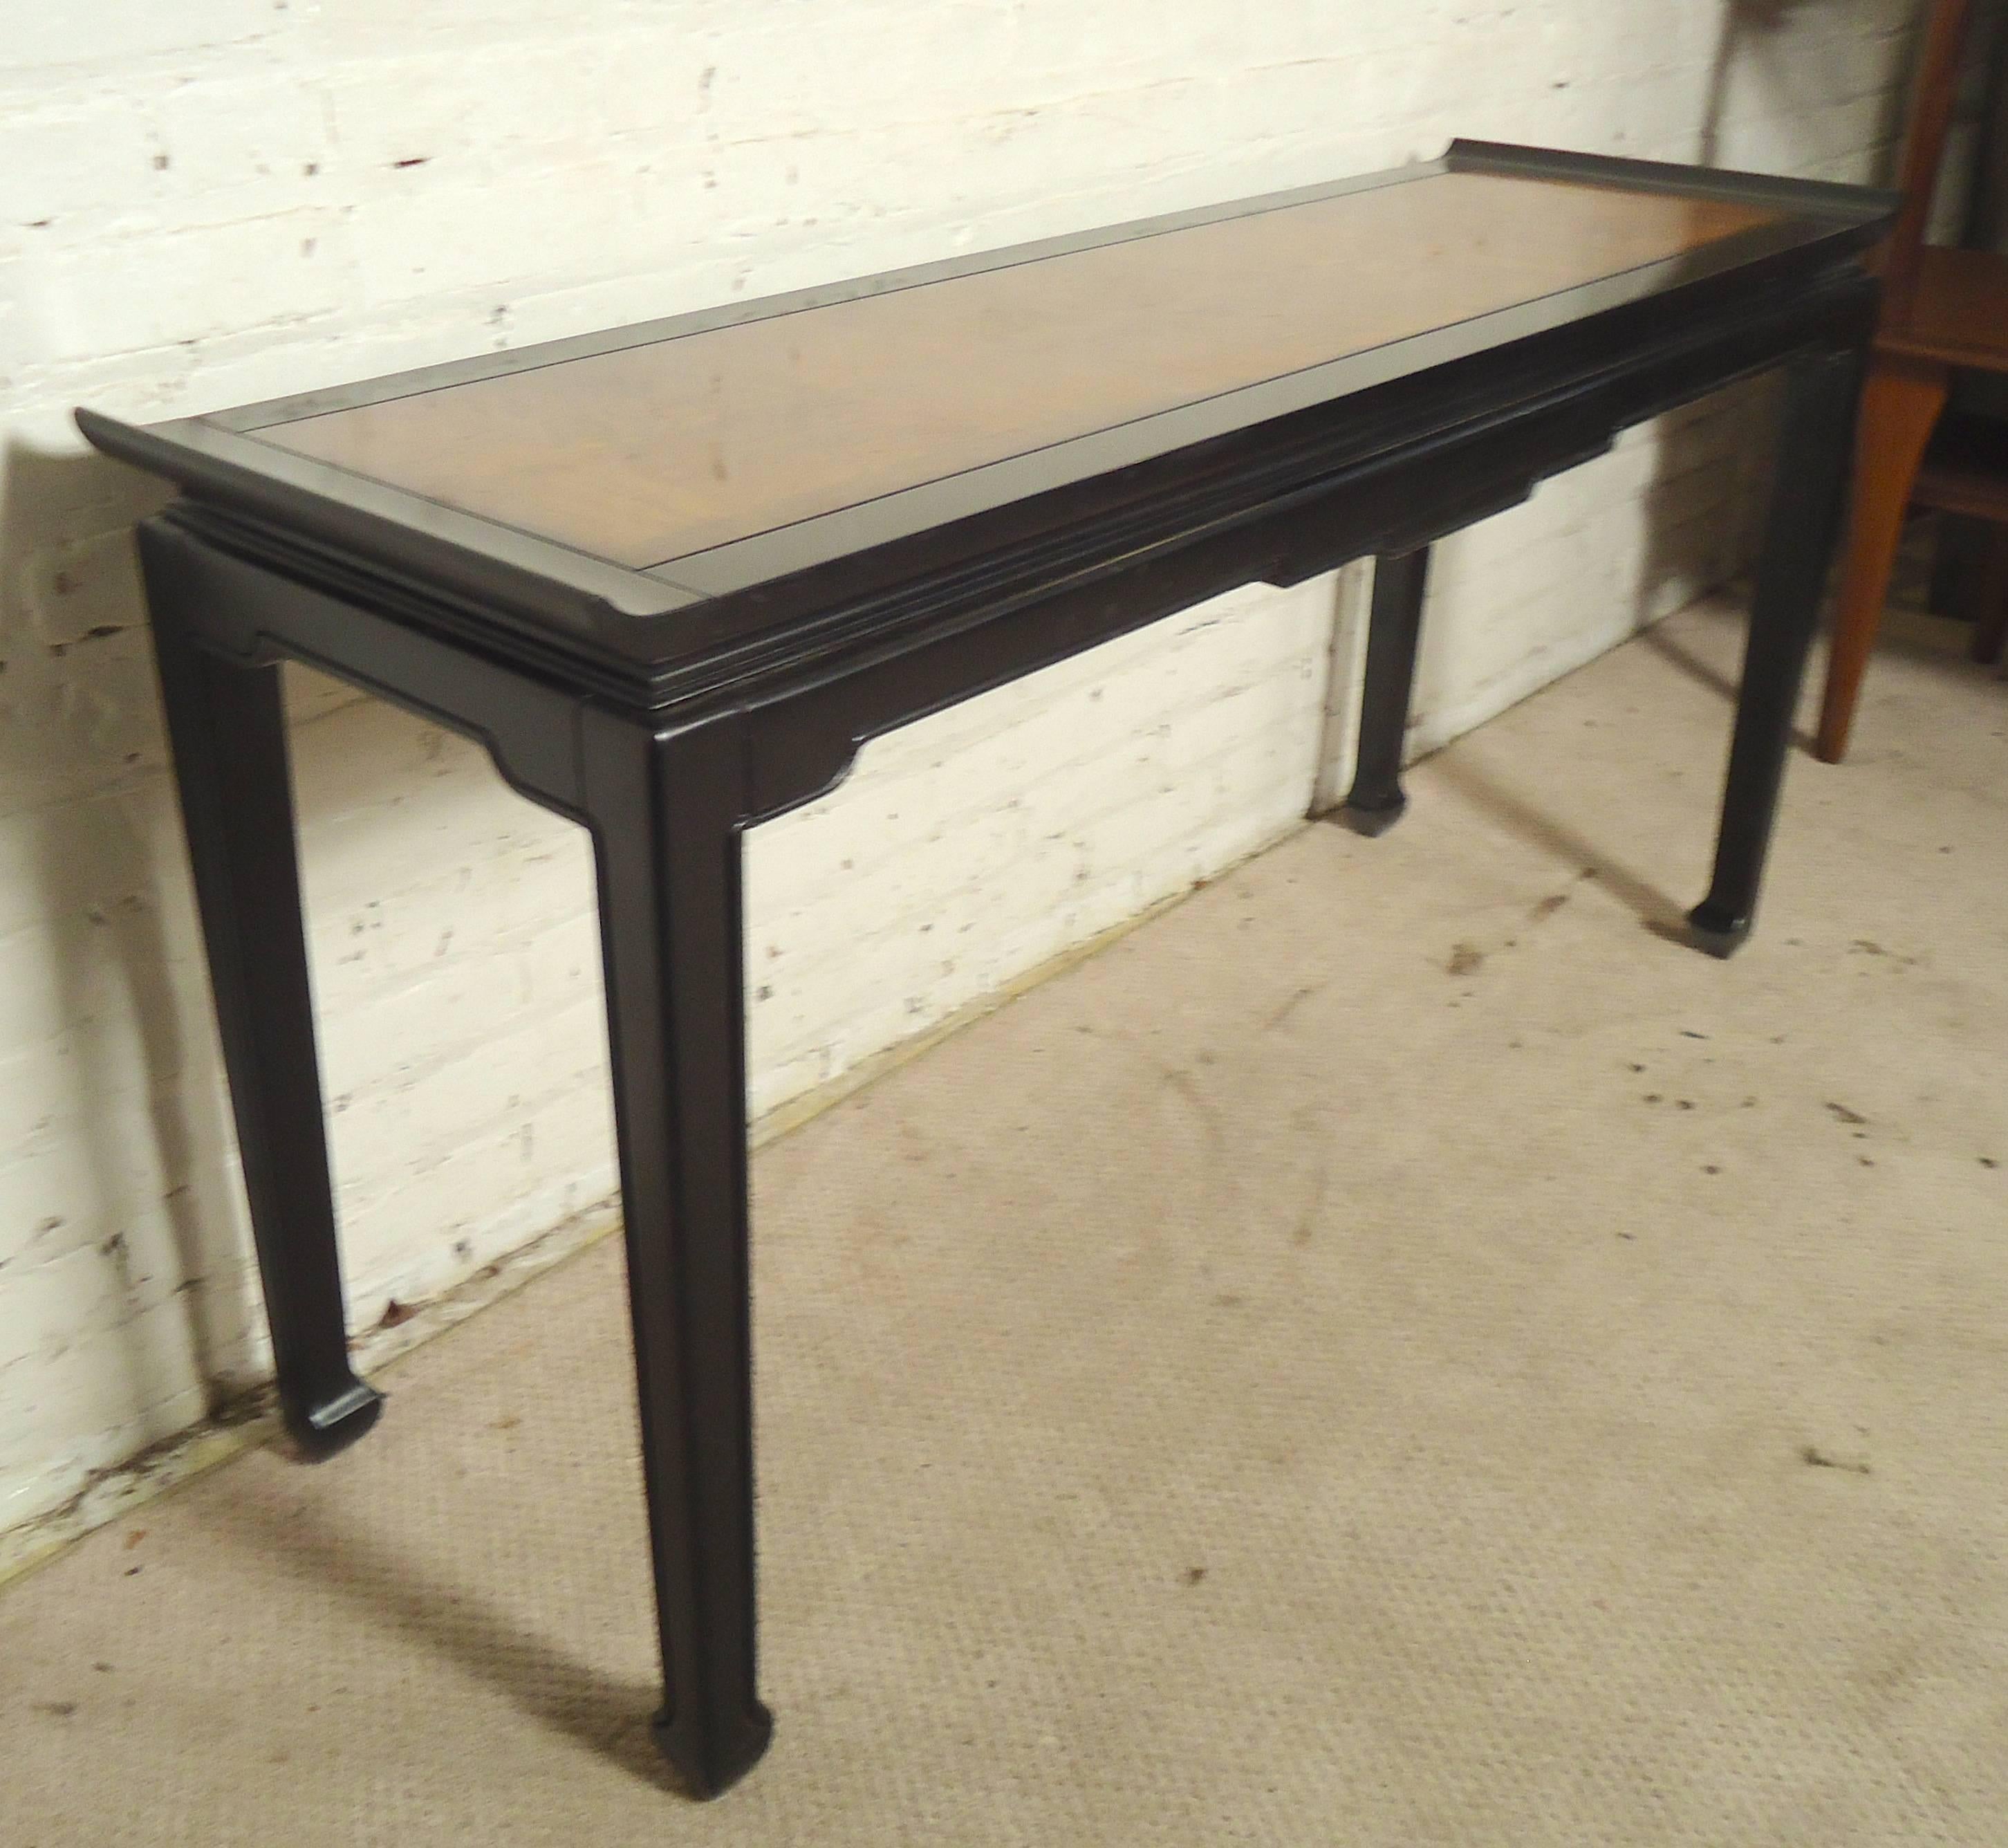 Black altar table with French polish finish featuring a blonde wood grain top. Attractive flared edges, and modern Asian detail.

(Please confirm item location - NY or NJ - with dealer)